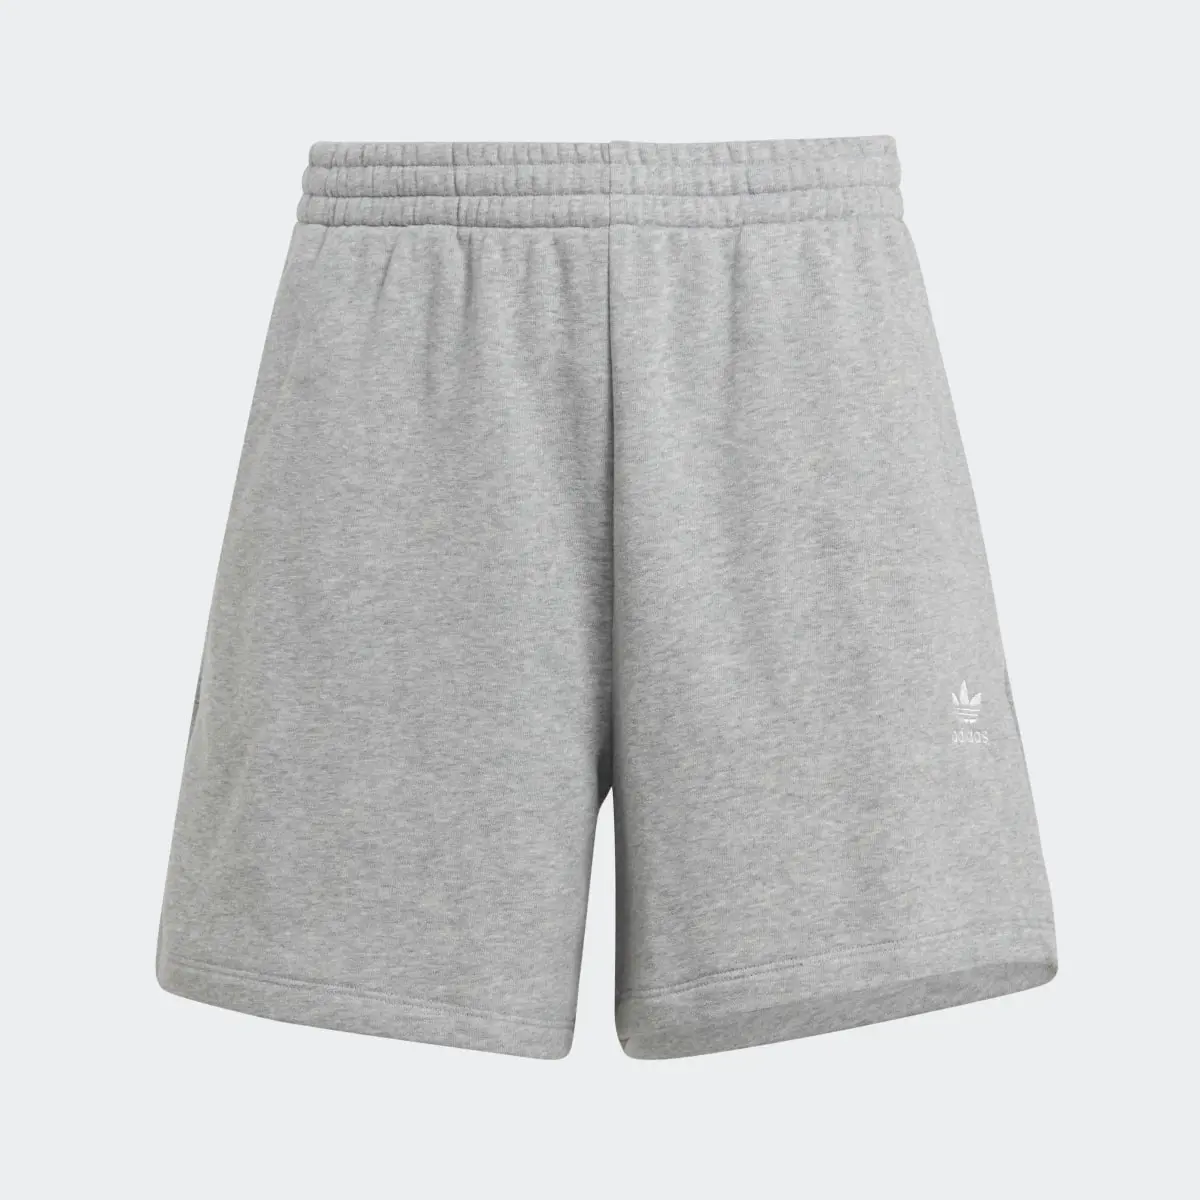 Adidas Adicolor Essentials French Terry Shorts. 3